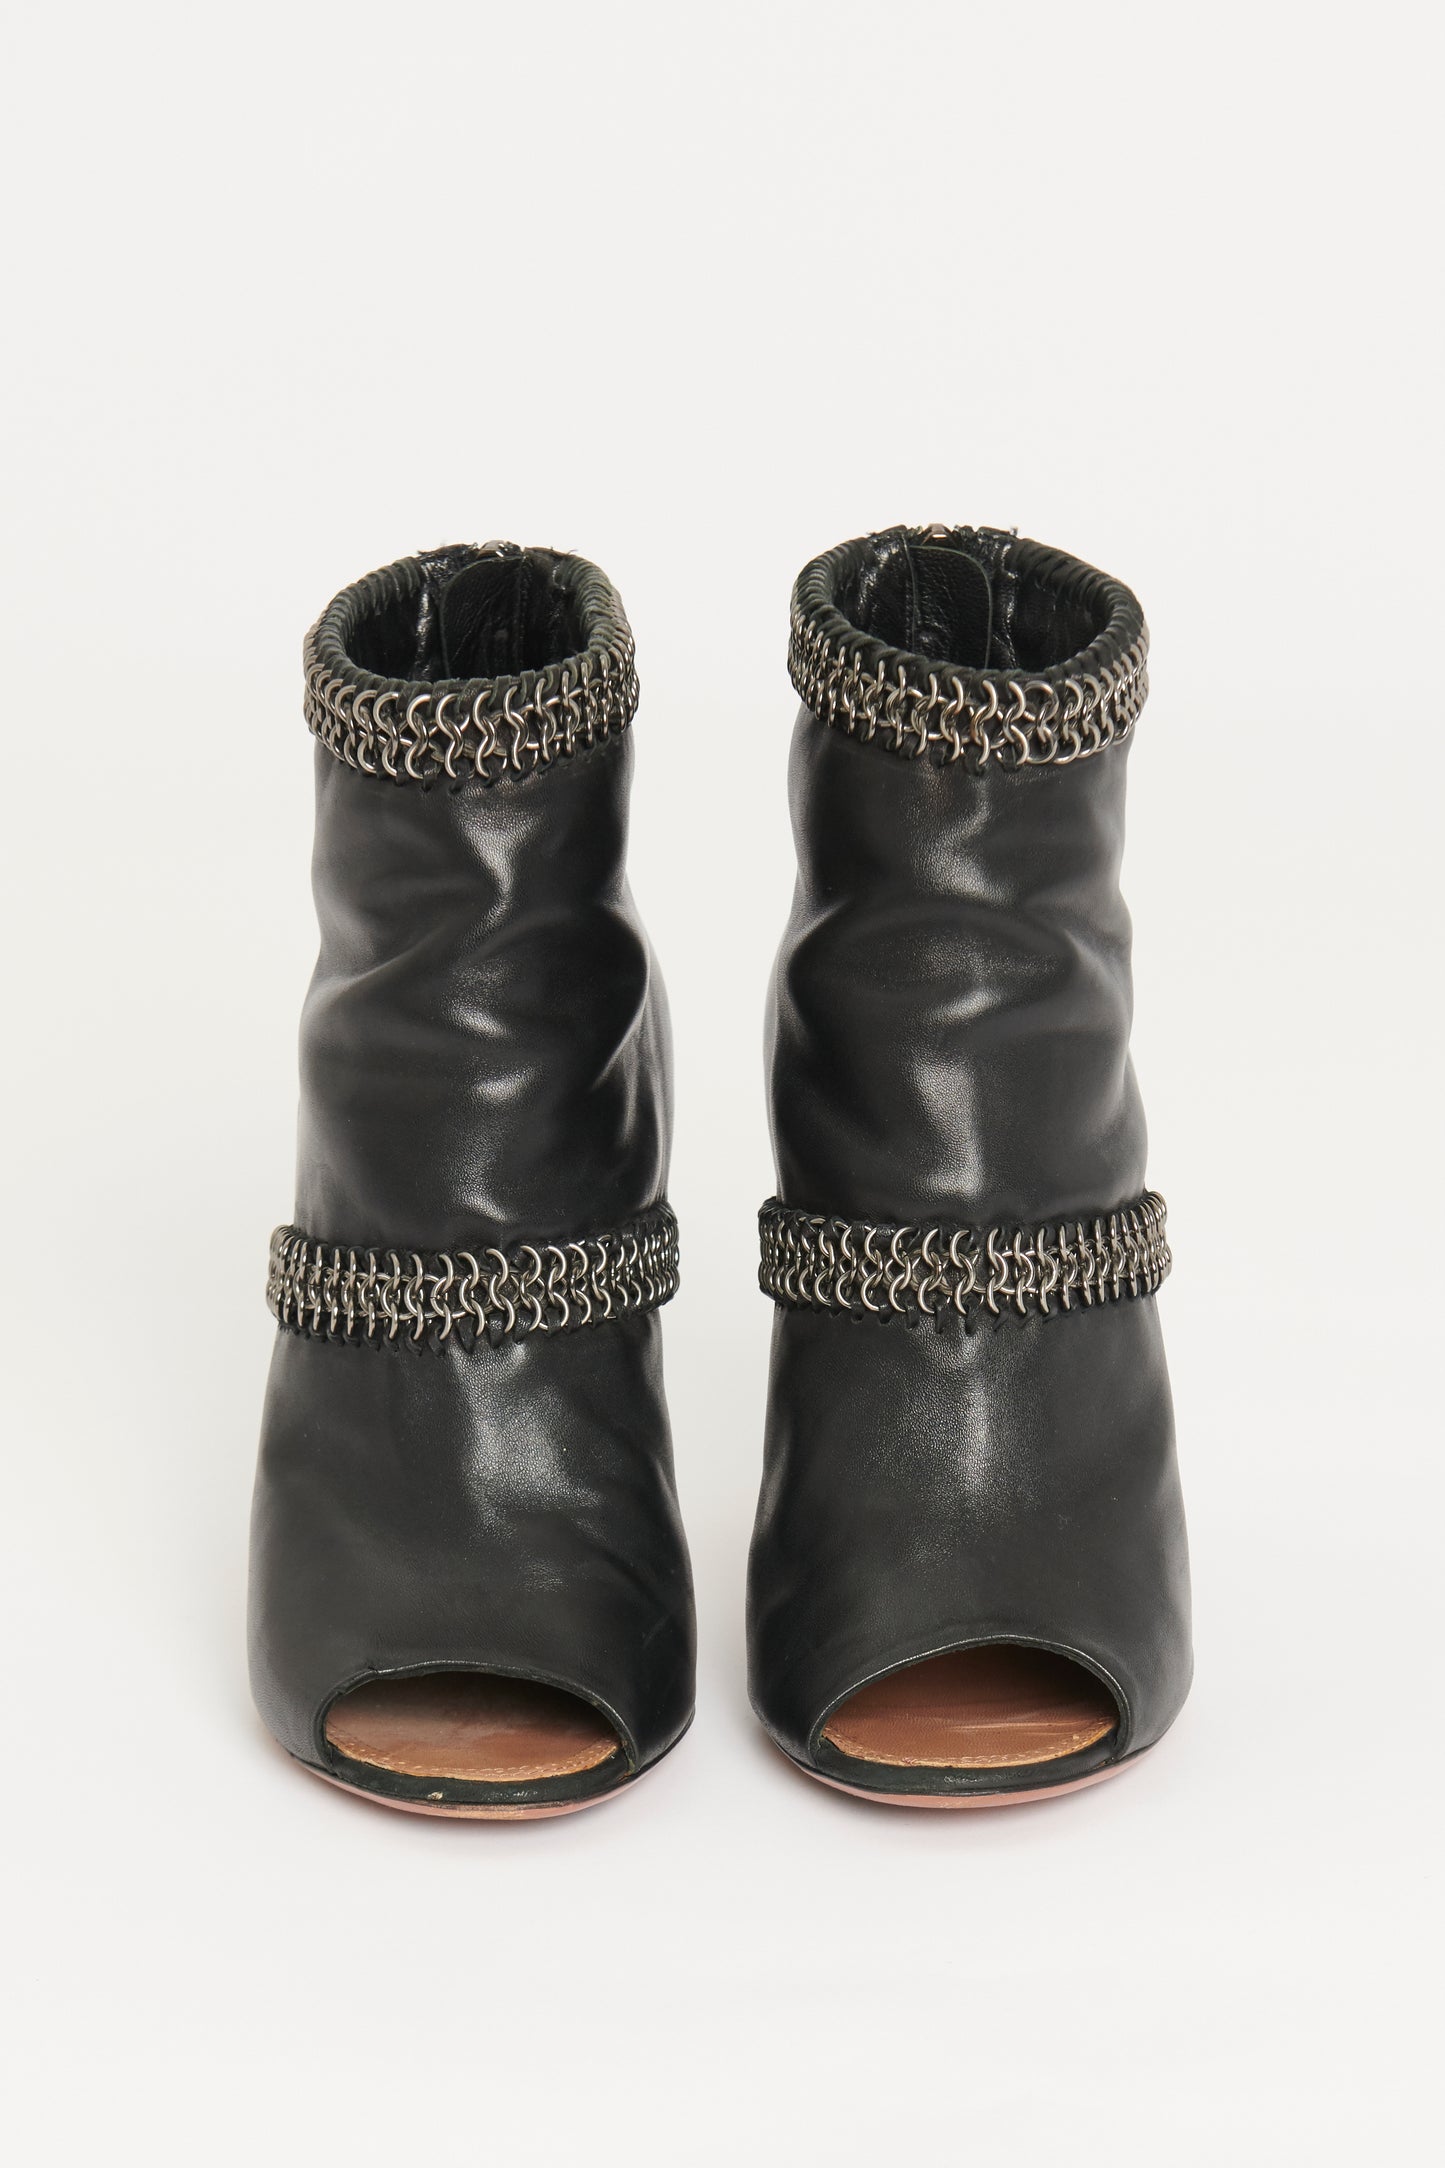 Black Leather Peep Toe Preowned Boots with Metal Rings